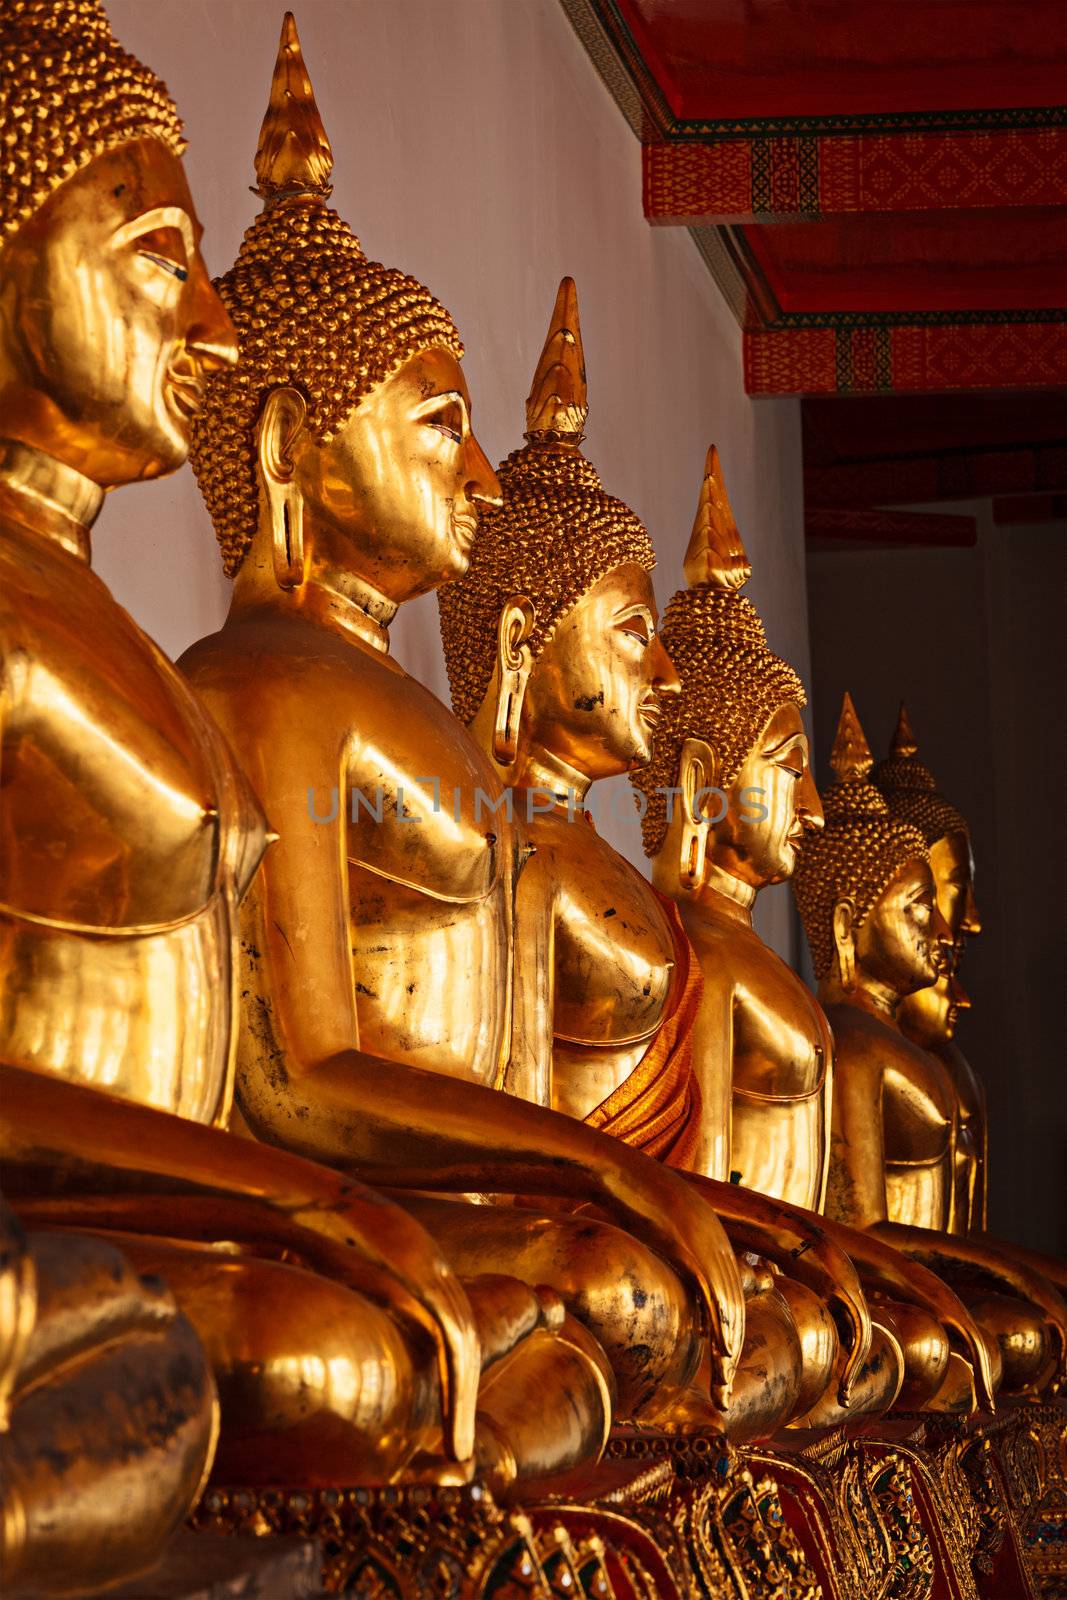 Row of golded sitting Buddha statues in Buddhist temple Wat Pho, Bangkok, Thailand. Low point of view, focus on 3rd one from the left